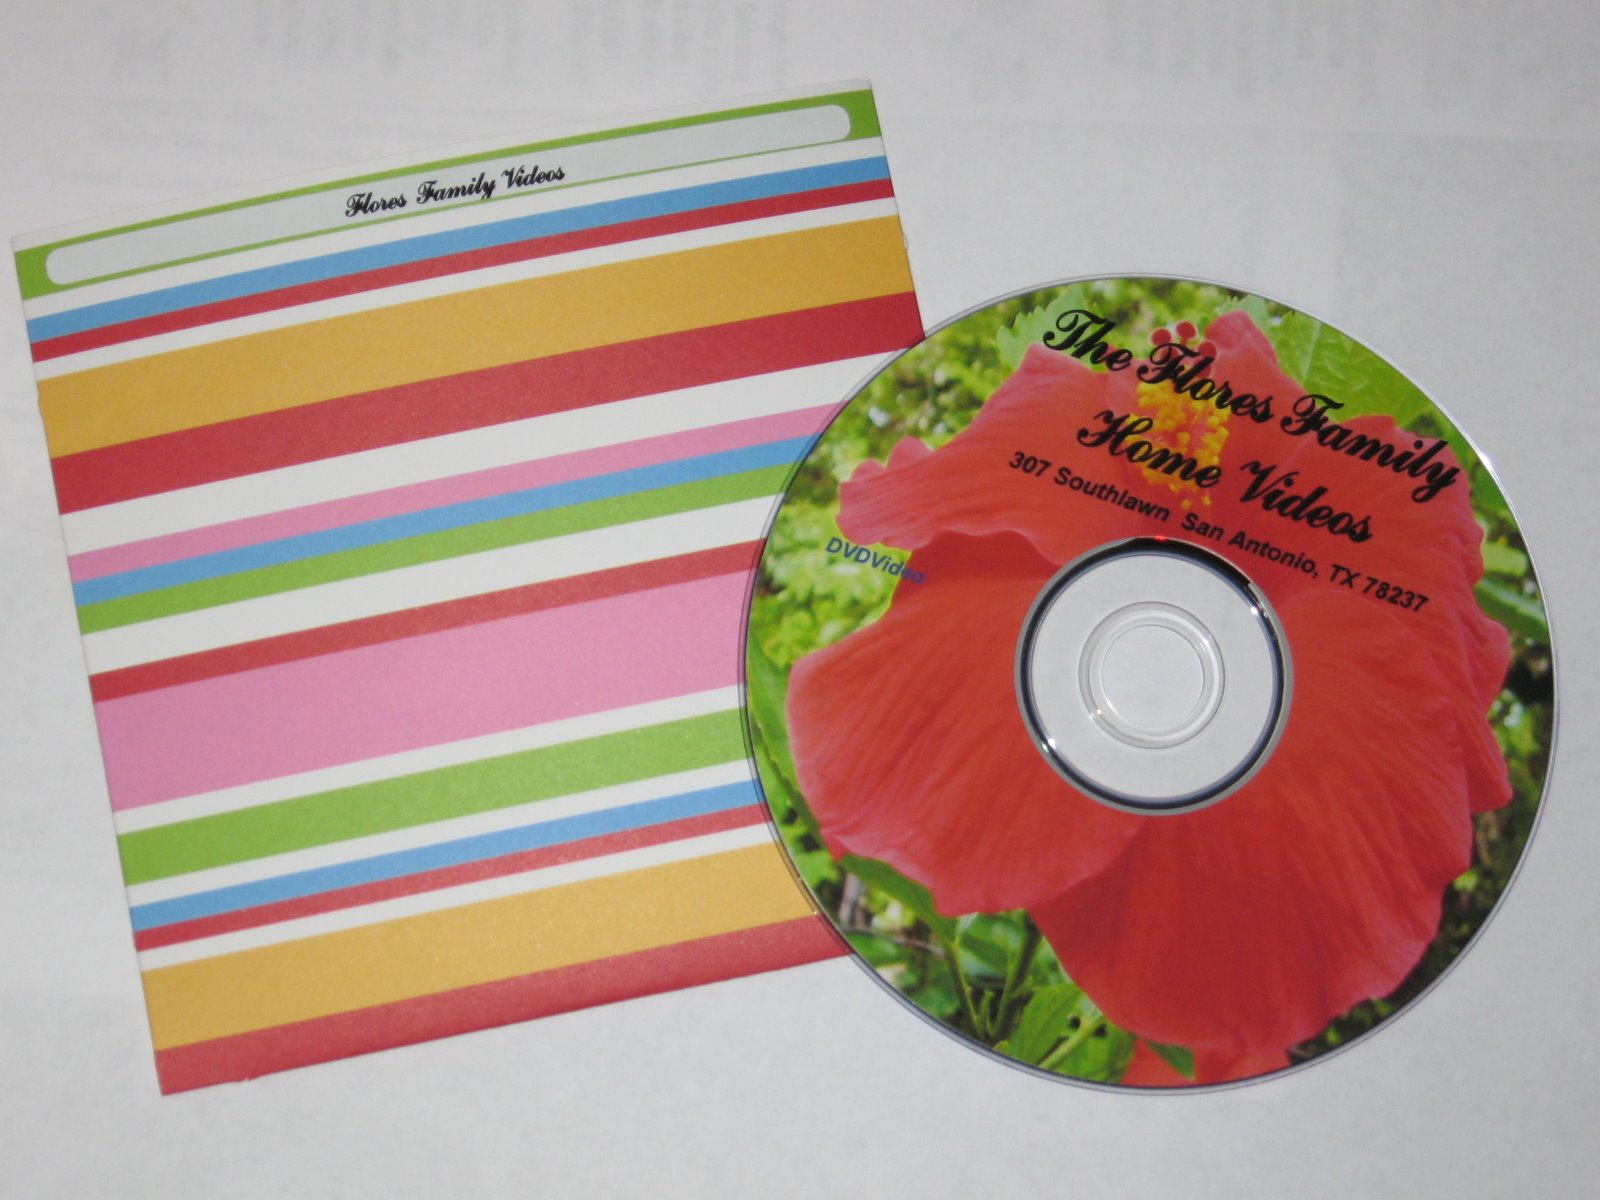 [DVD+sleeve+and+label.JPG]